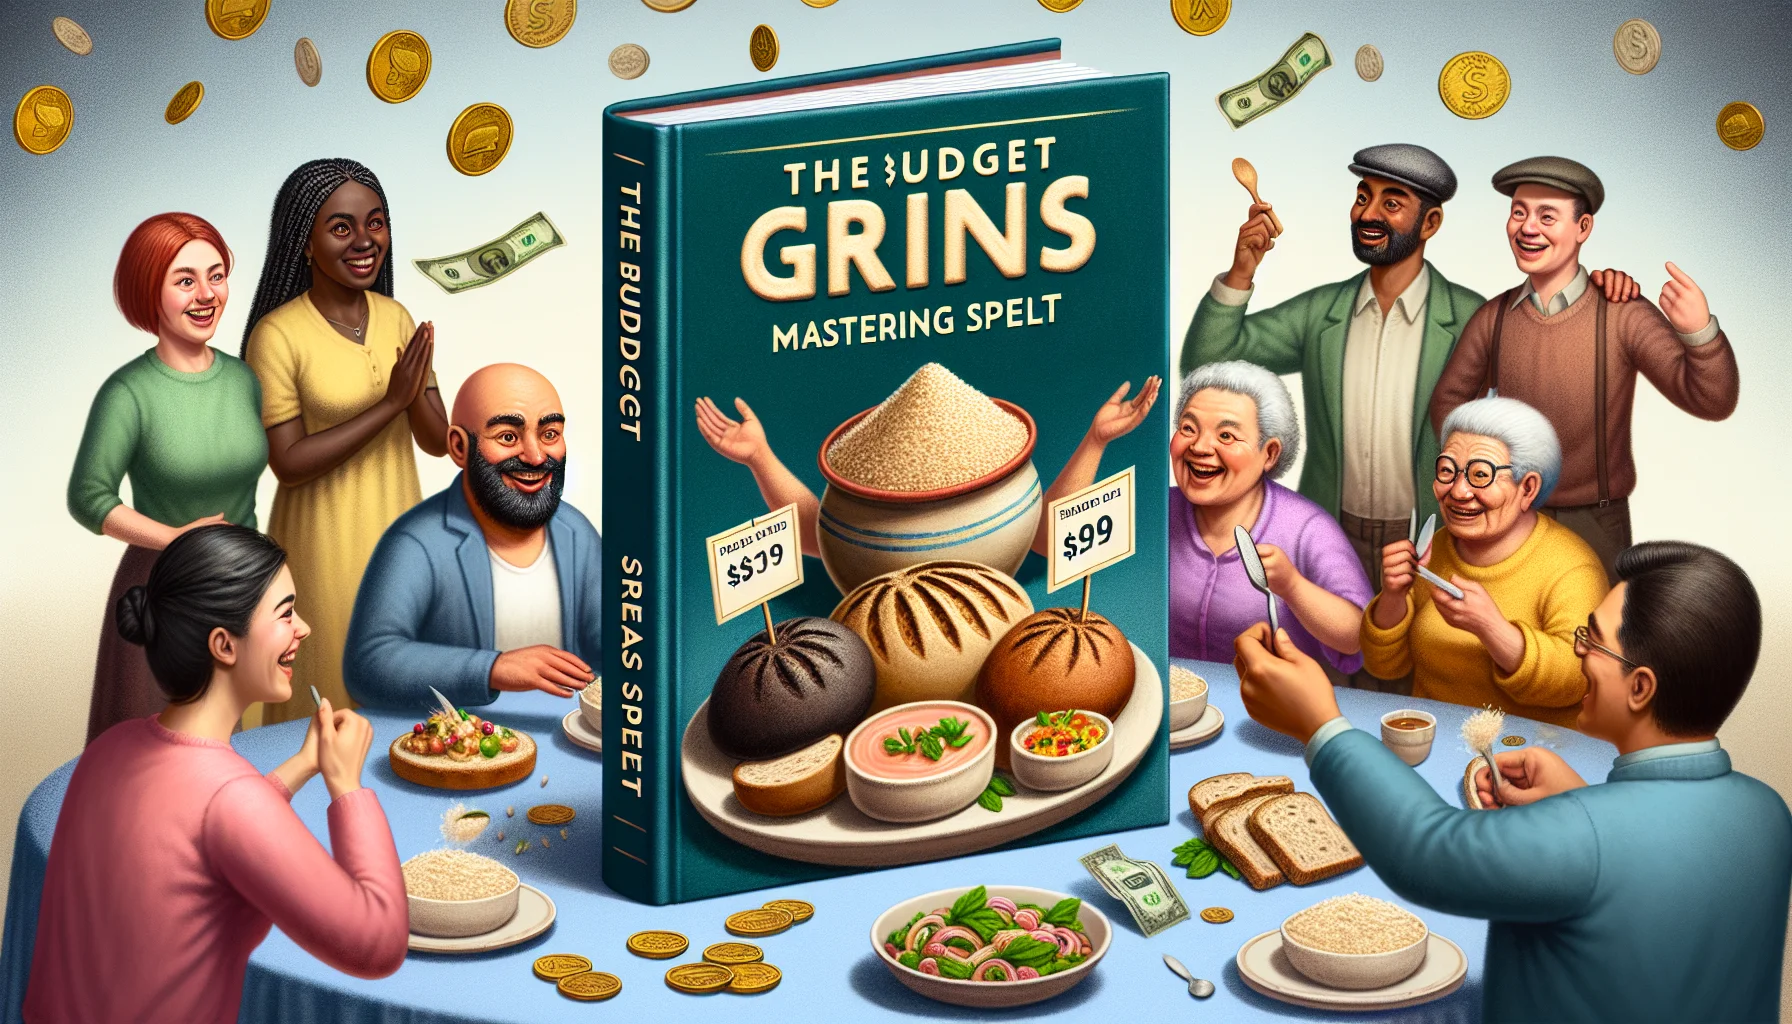 Create a realistic yet humorous image of a comprehensive guide to Spelt. Imagine the title 'The Budget Grains: Mastering Spelt' embossed on the book cover, showing a variety of spelt dishes both sweet and savory. In the foreground, a group of diverse people, including a black woman, a middle-eastern man, a Hispanic elderly woman, and a South Asian teenager, all animatedly enjoying the spelt recipes with price tags that read less than a dollar, indicating affordability. The background should be filled with coins and dollar bills, subtly driving home the point of eating healthy for less money.